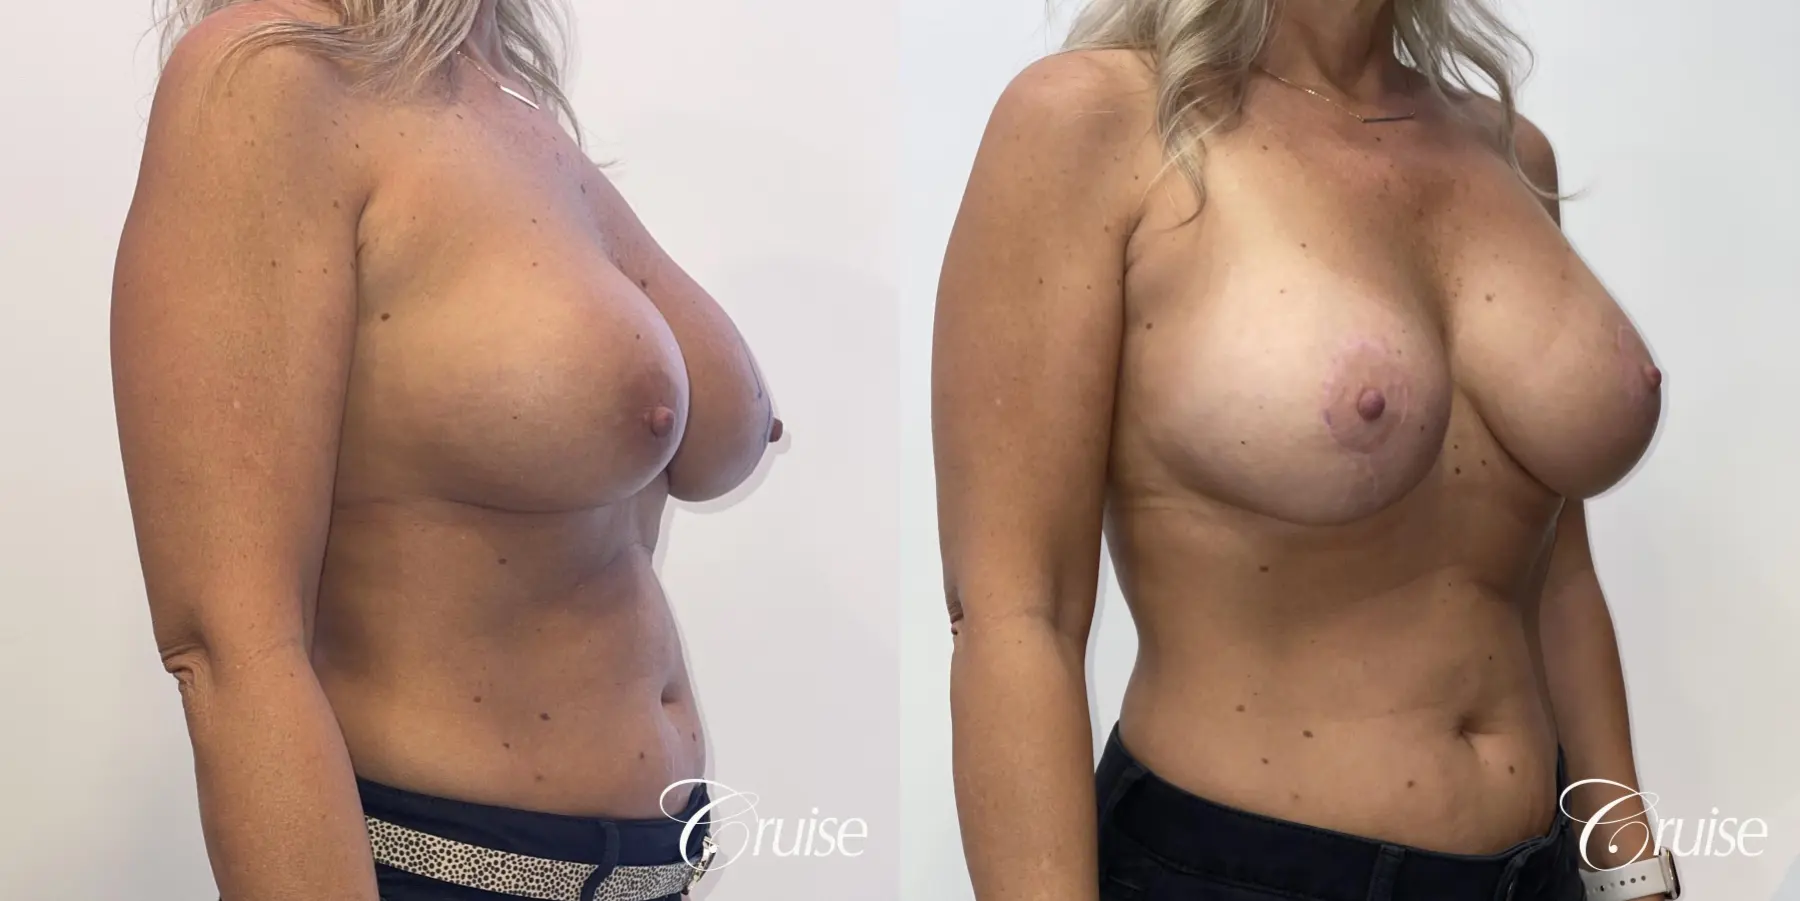 Breast Lift: Patient 1 - Before and After 2